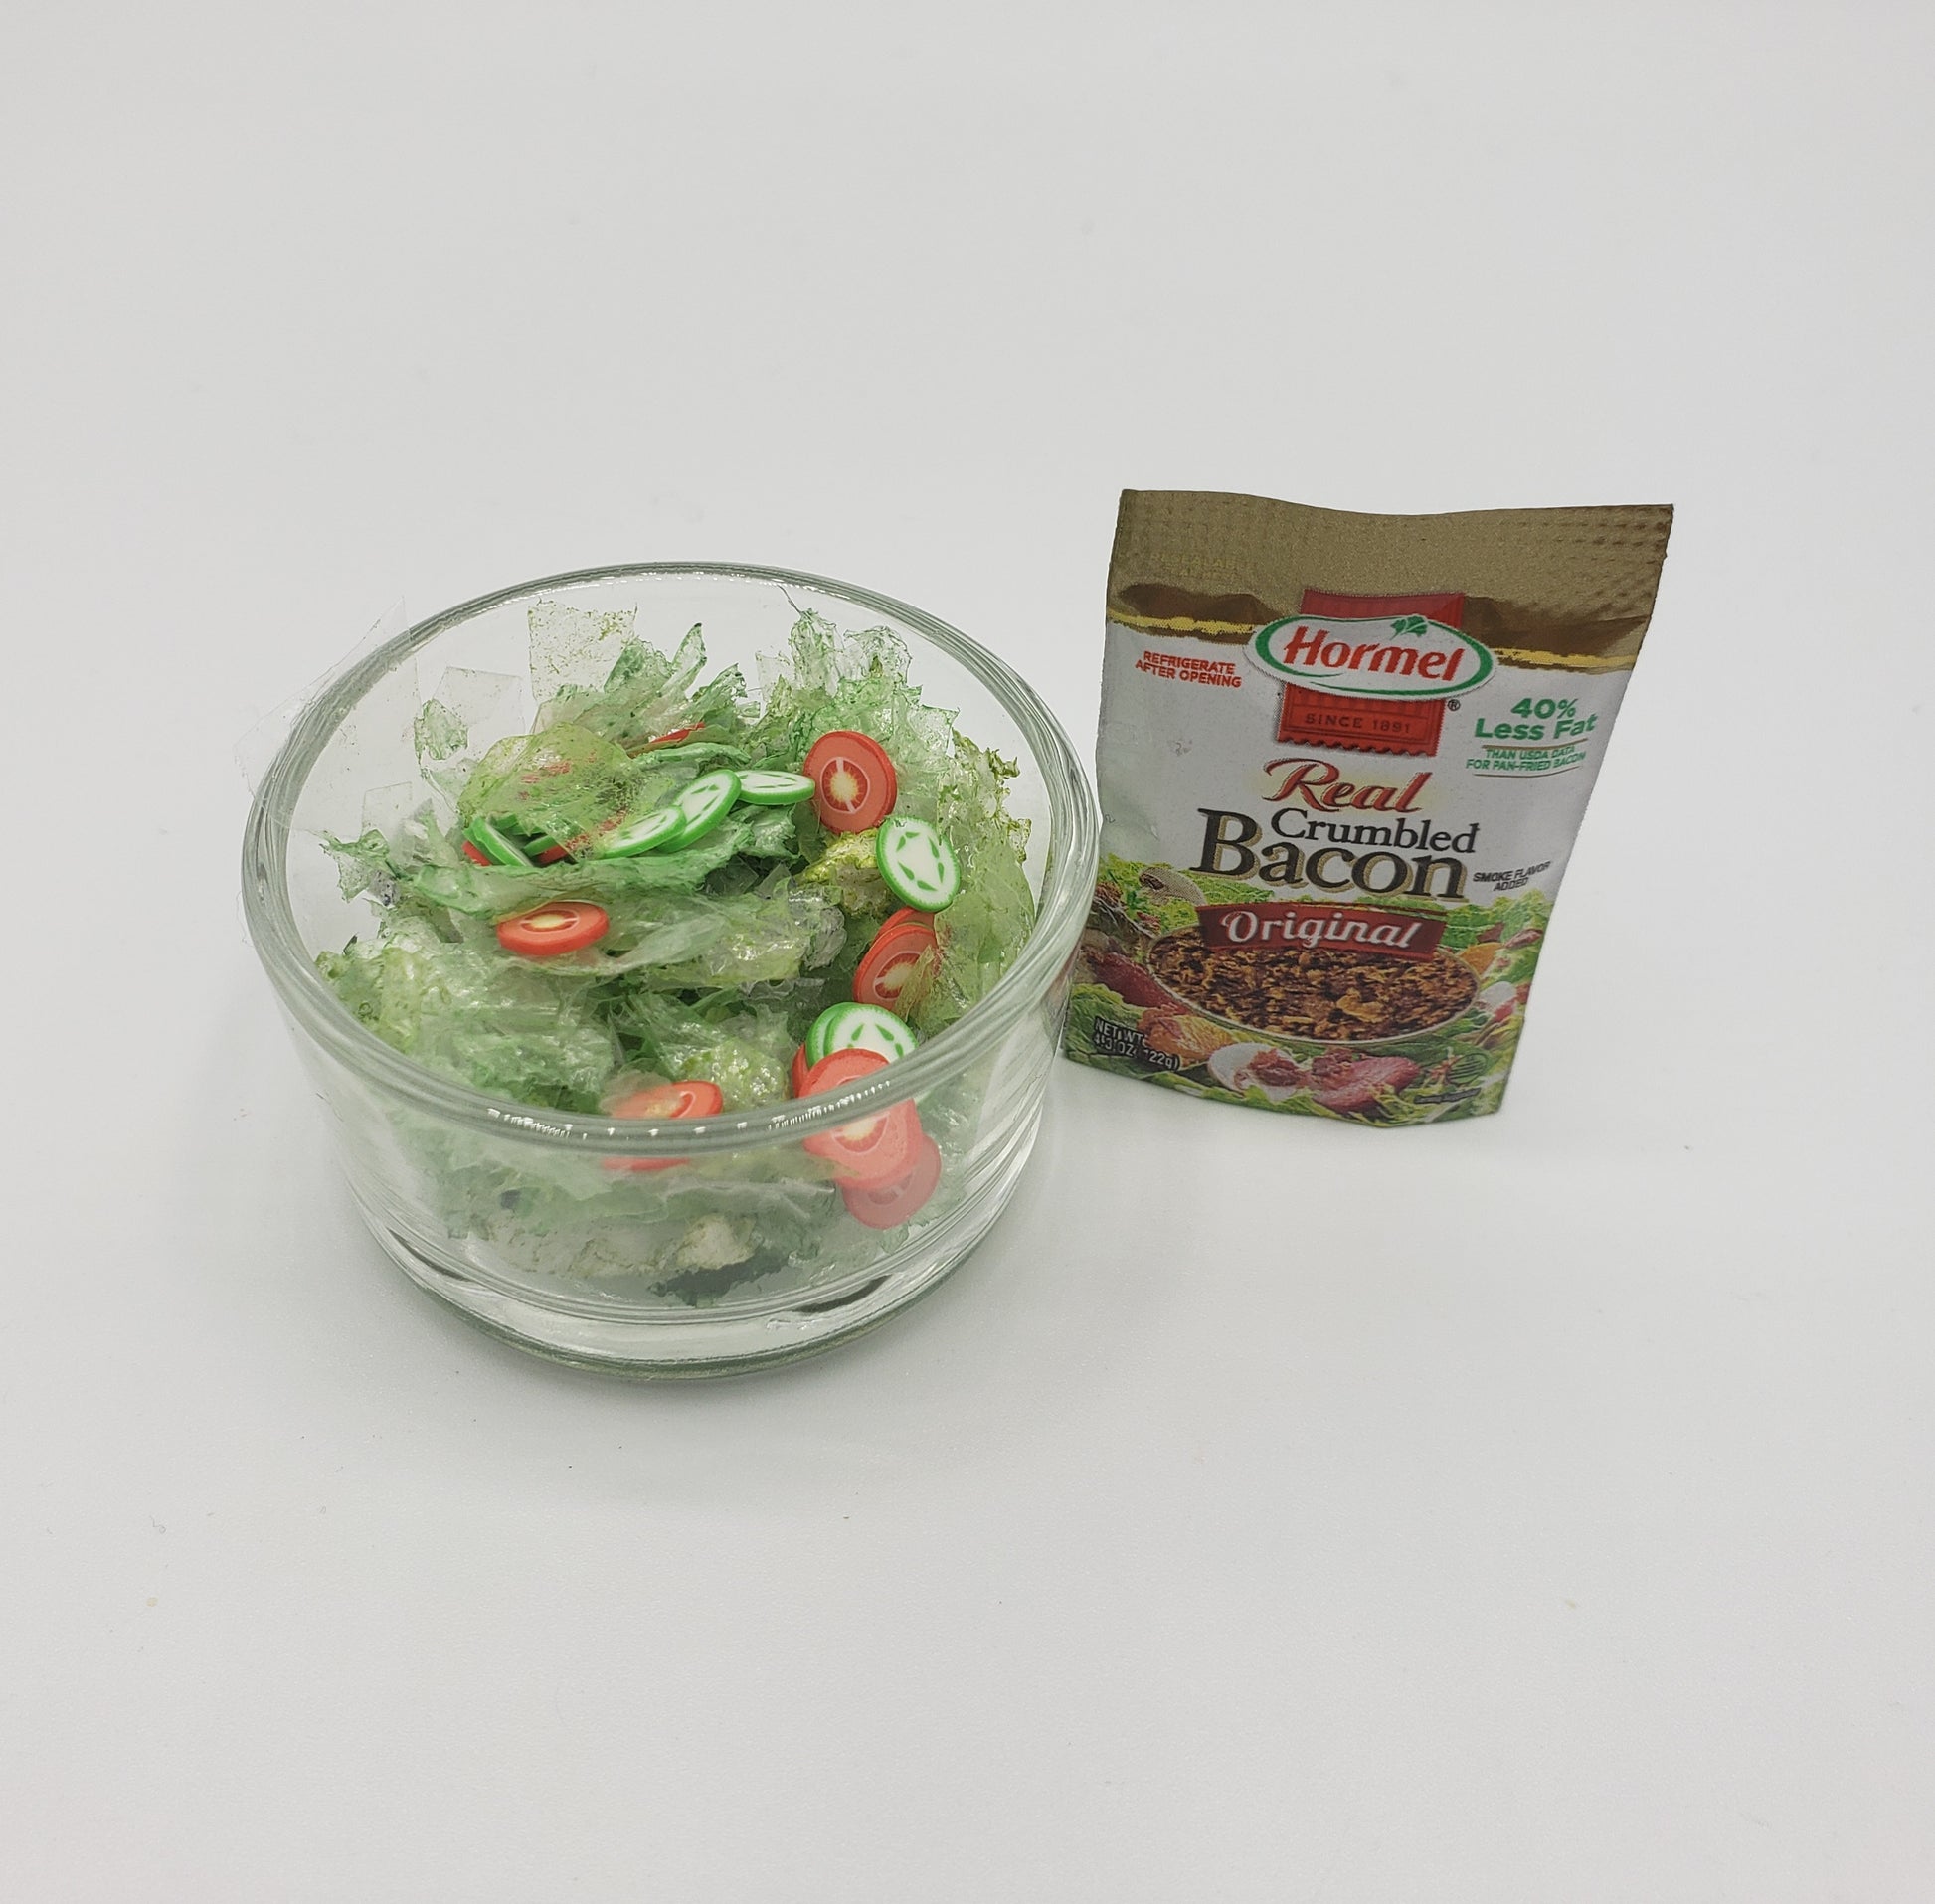 Salad with bacon bits for dolls